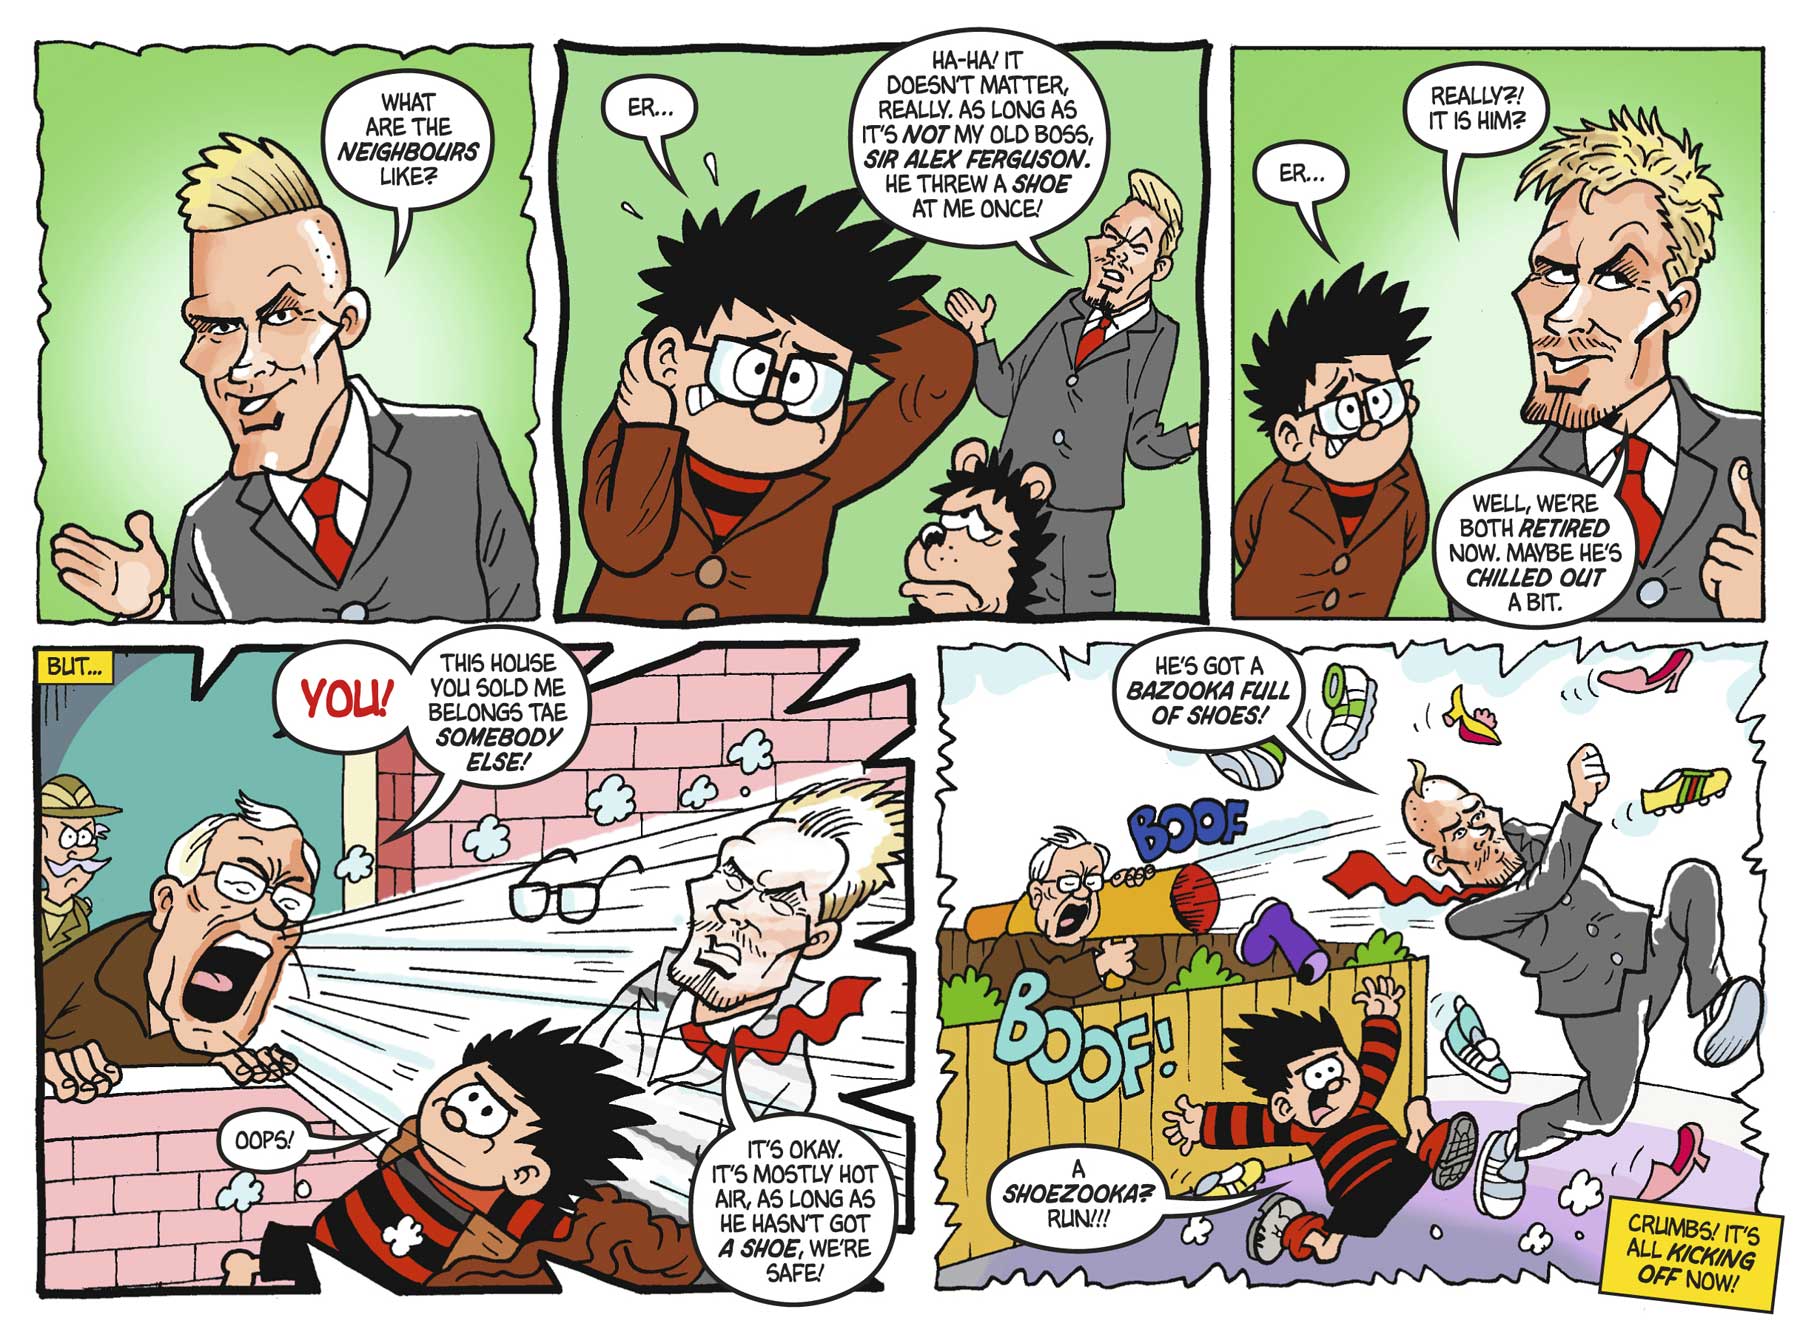 David Beckham in the 75th anniversary issue of The Beano